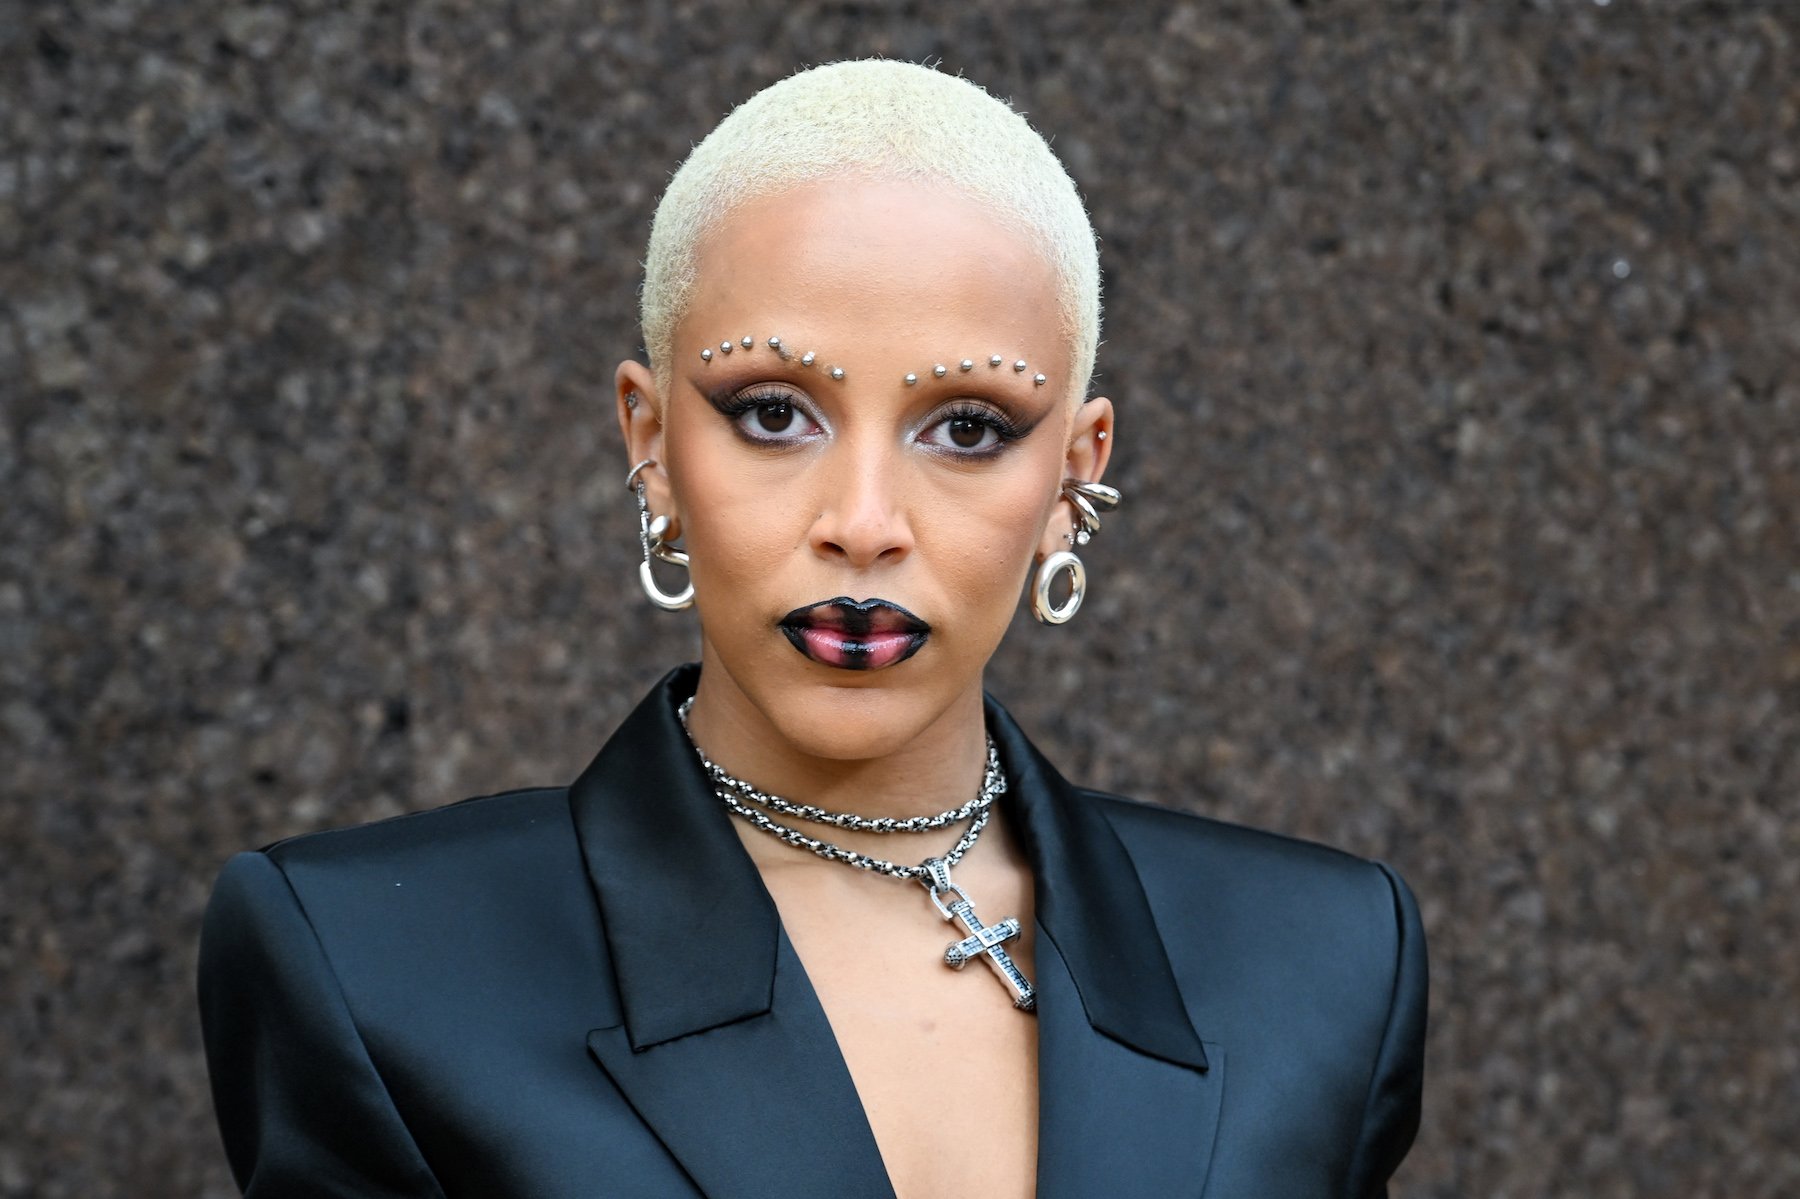 Doja Cat, who was compared to Britney Spears after shaving her head, wearing a black blazer